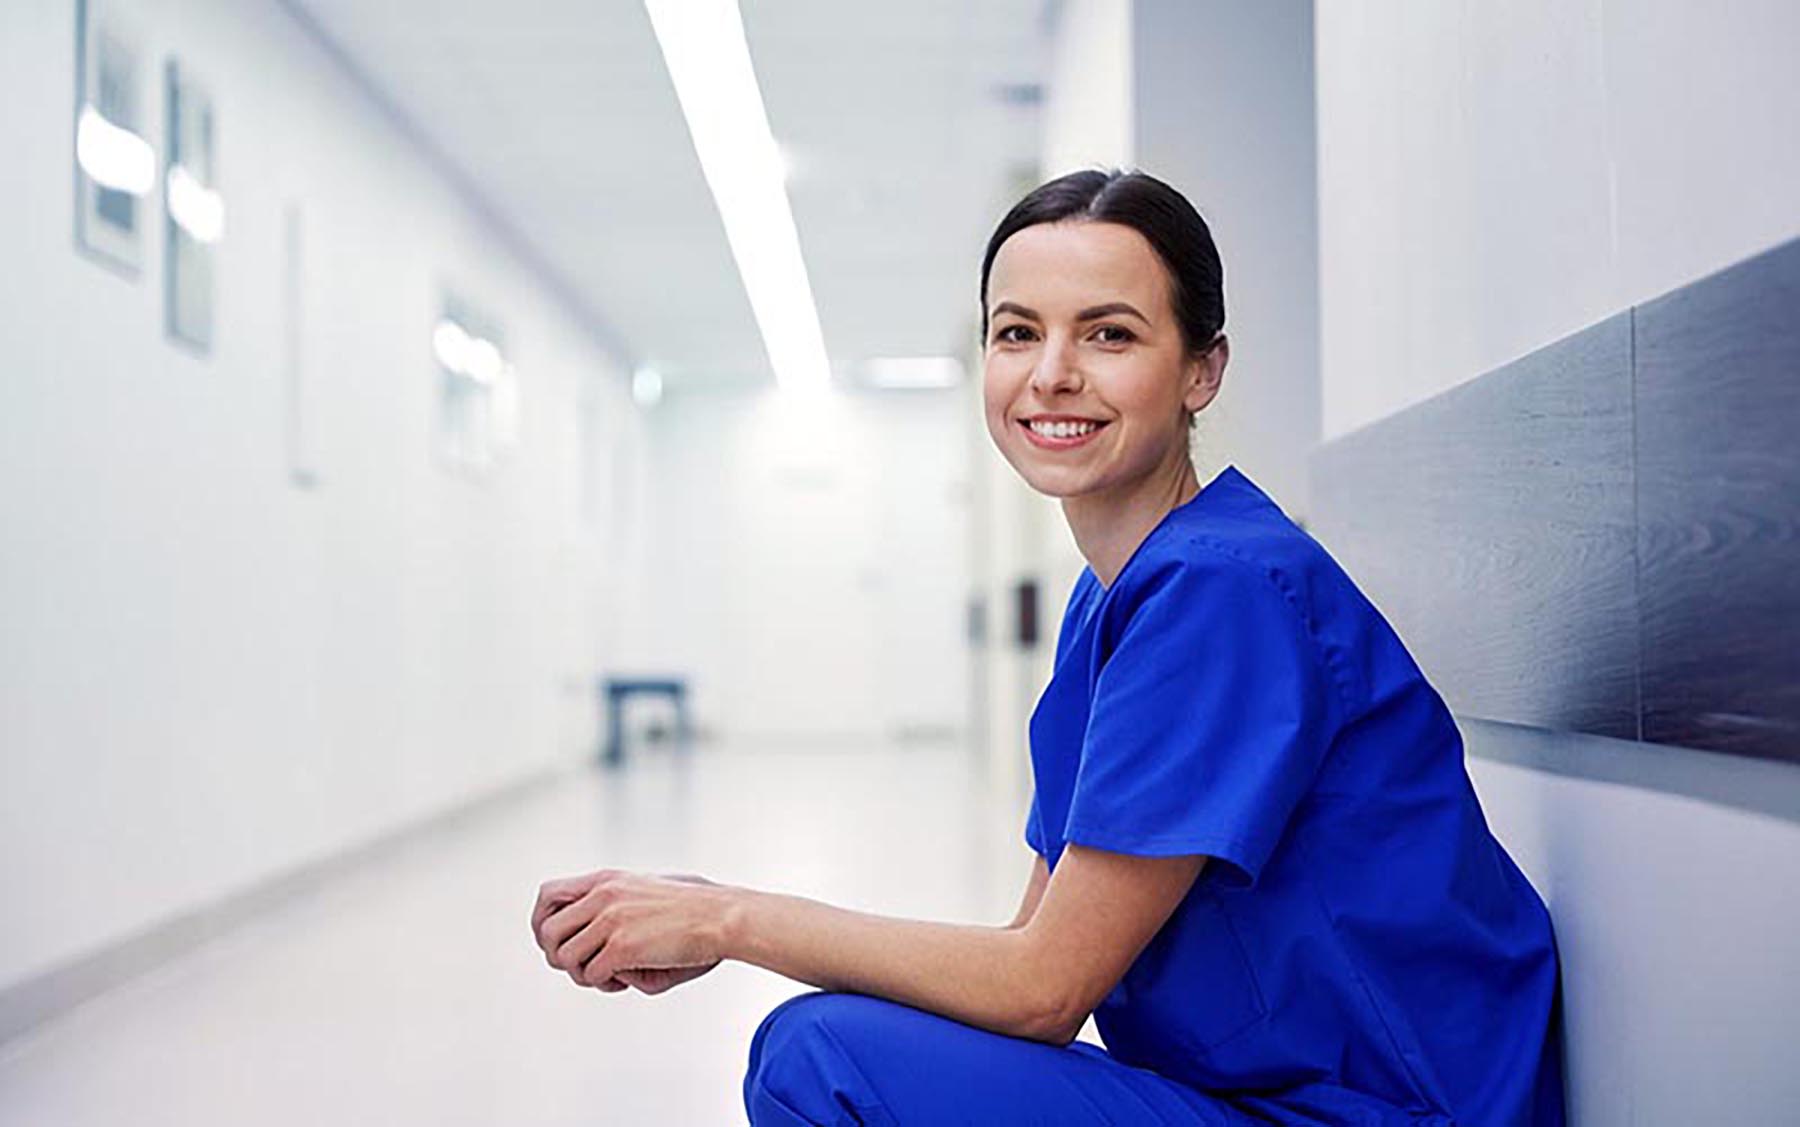 What Can You Do with an Associate’s Degree in Nursing